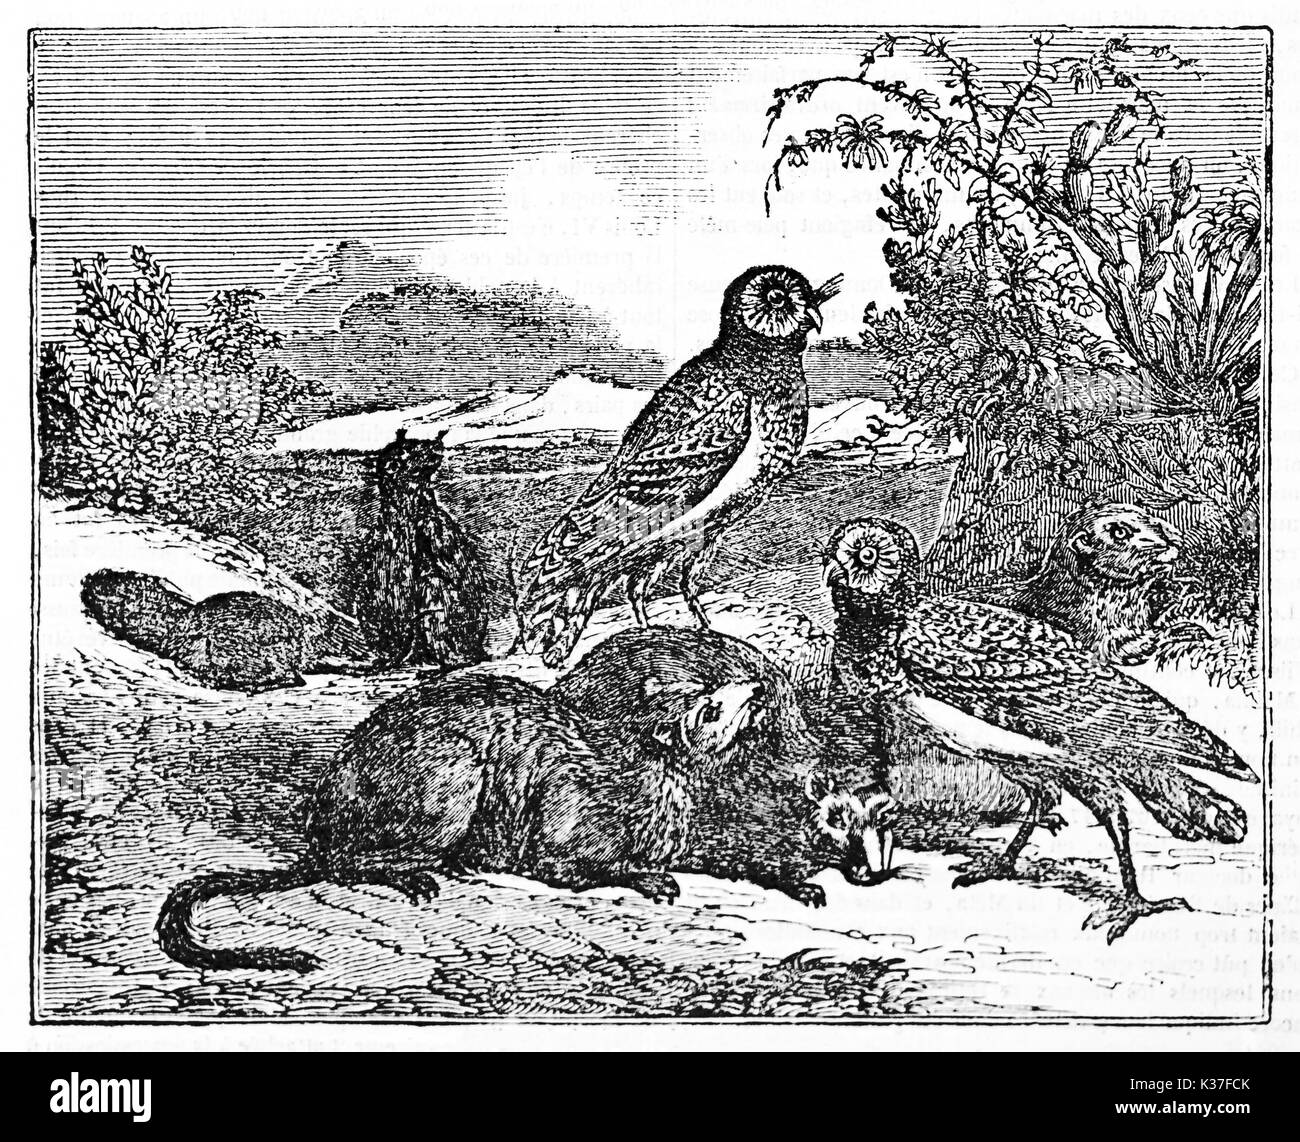 Burrowing owls (Athene cunicularia) nest and roost in burrows such as those excavated by prairie dogs (Cynomys spp.). Old Illustration by unidentified author published on Magasin Pittoresque Paris 1834 Stock Photo